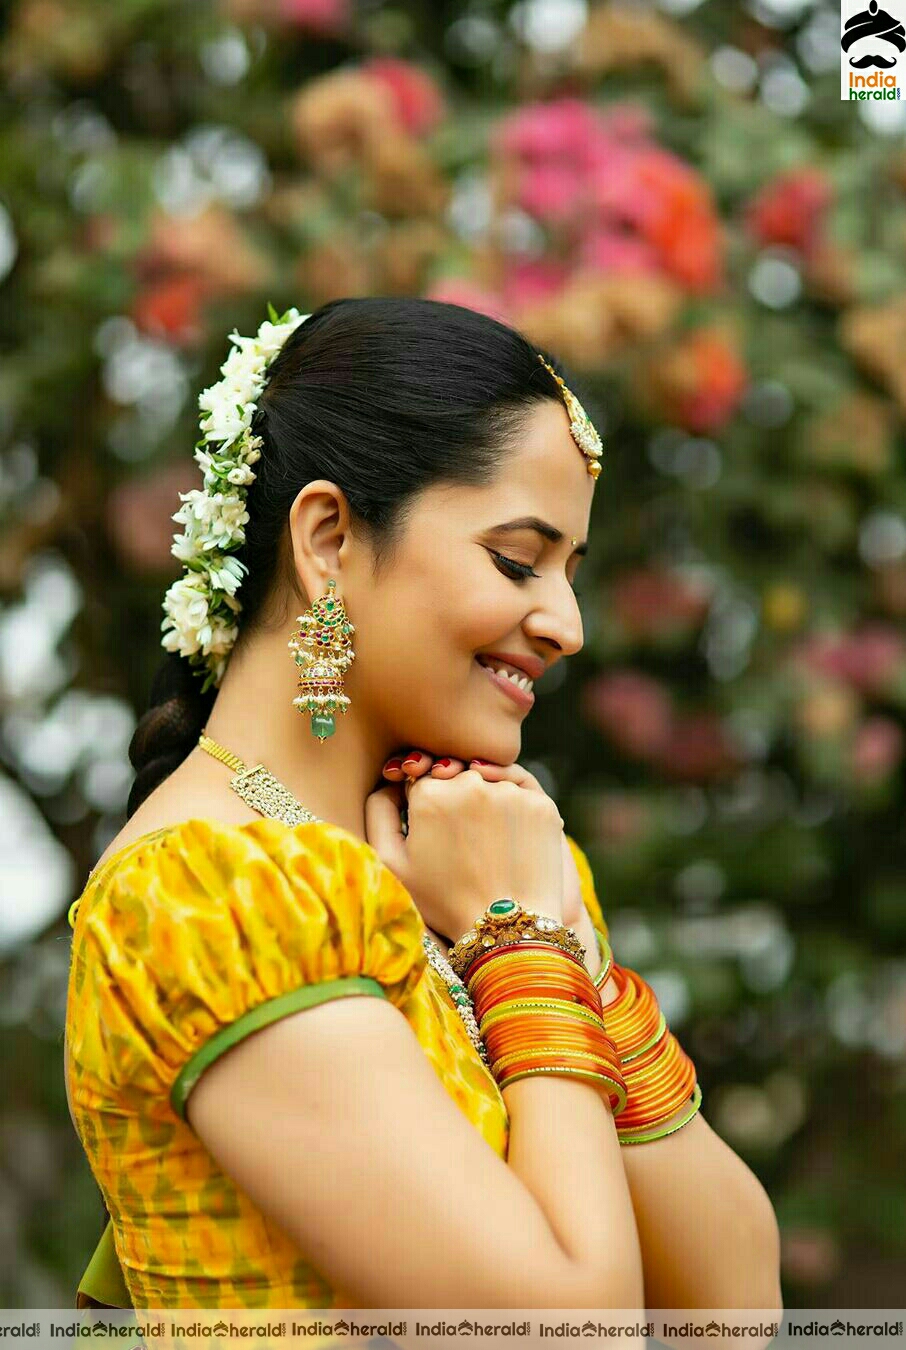 Anasuya looking gorgeous and resplendent in yellow traditional attire